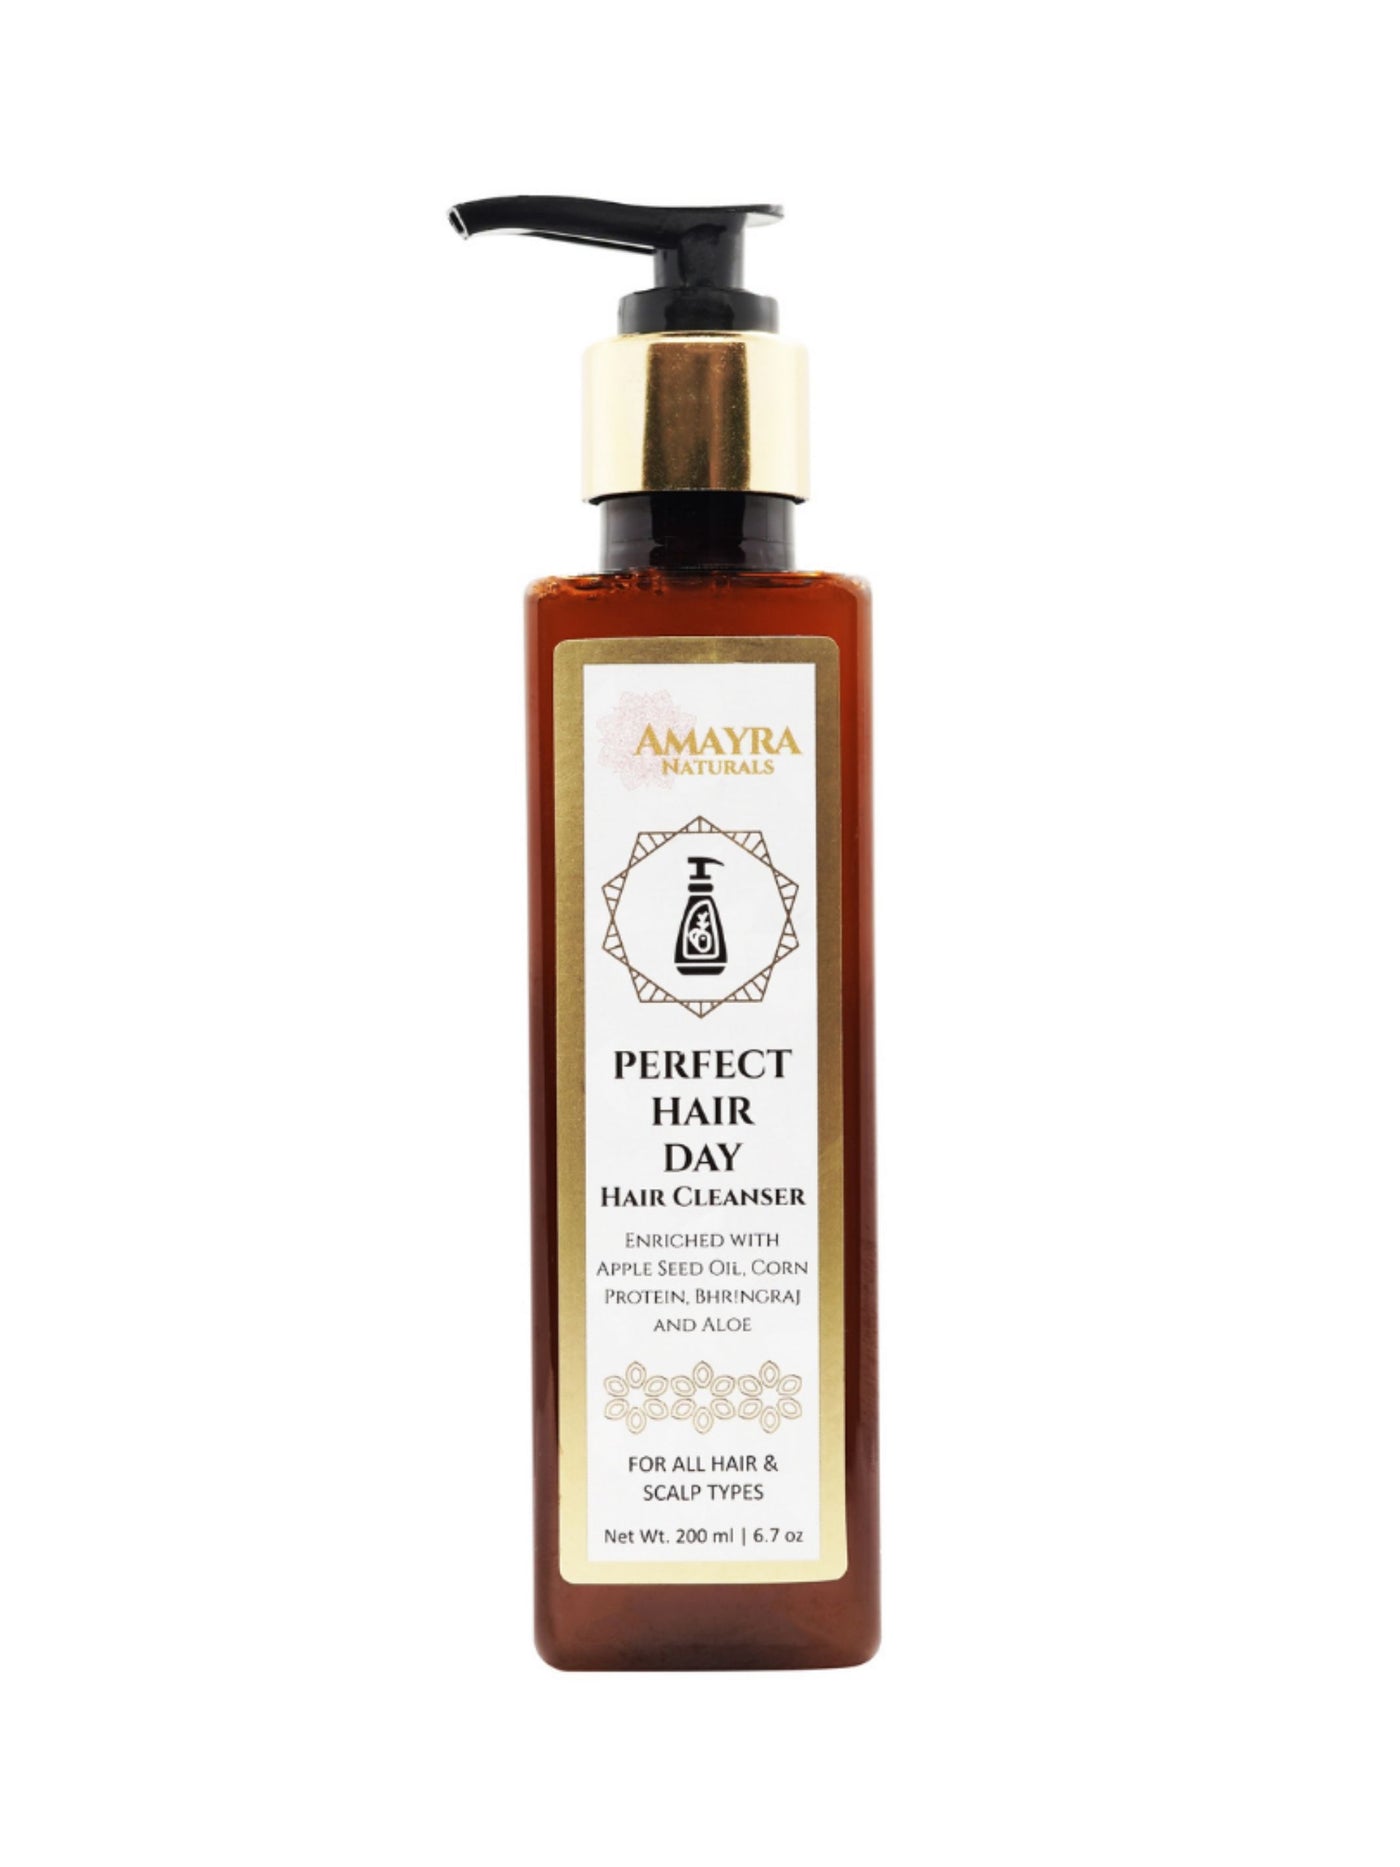 Amayra Naturals Perfect Hair Day Cleanser - 200ml - View 1